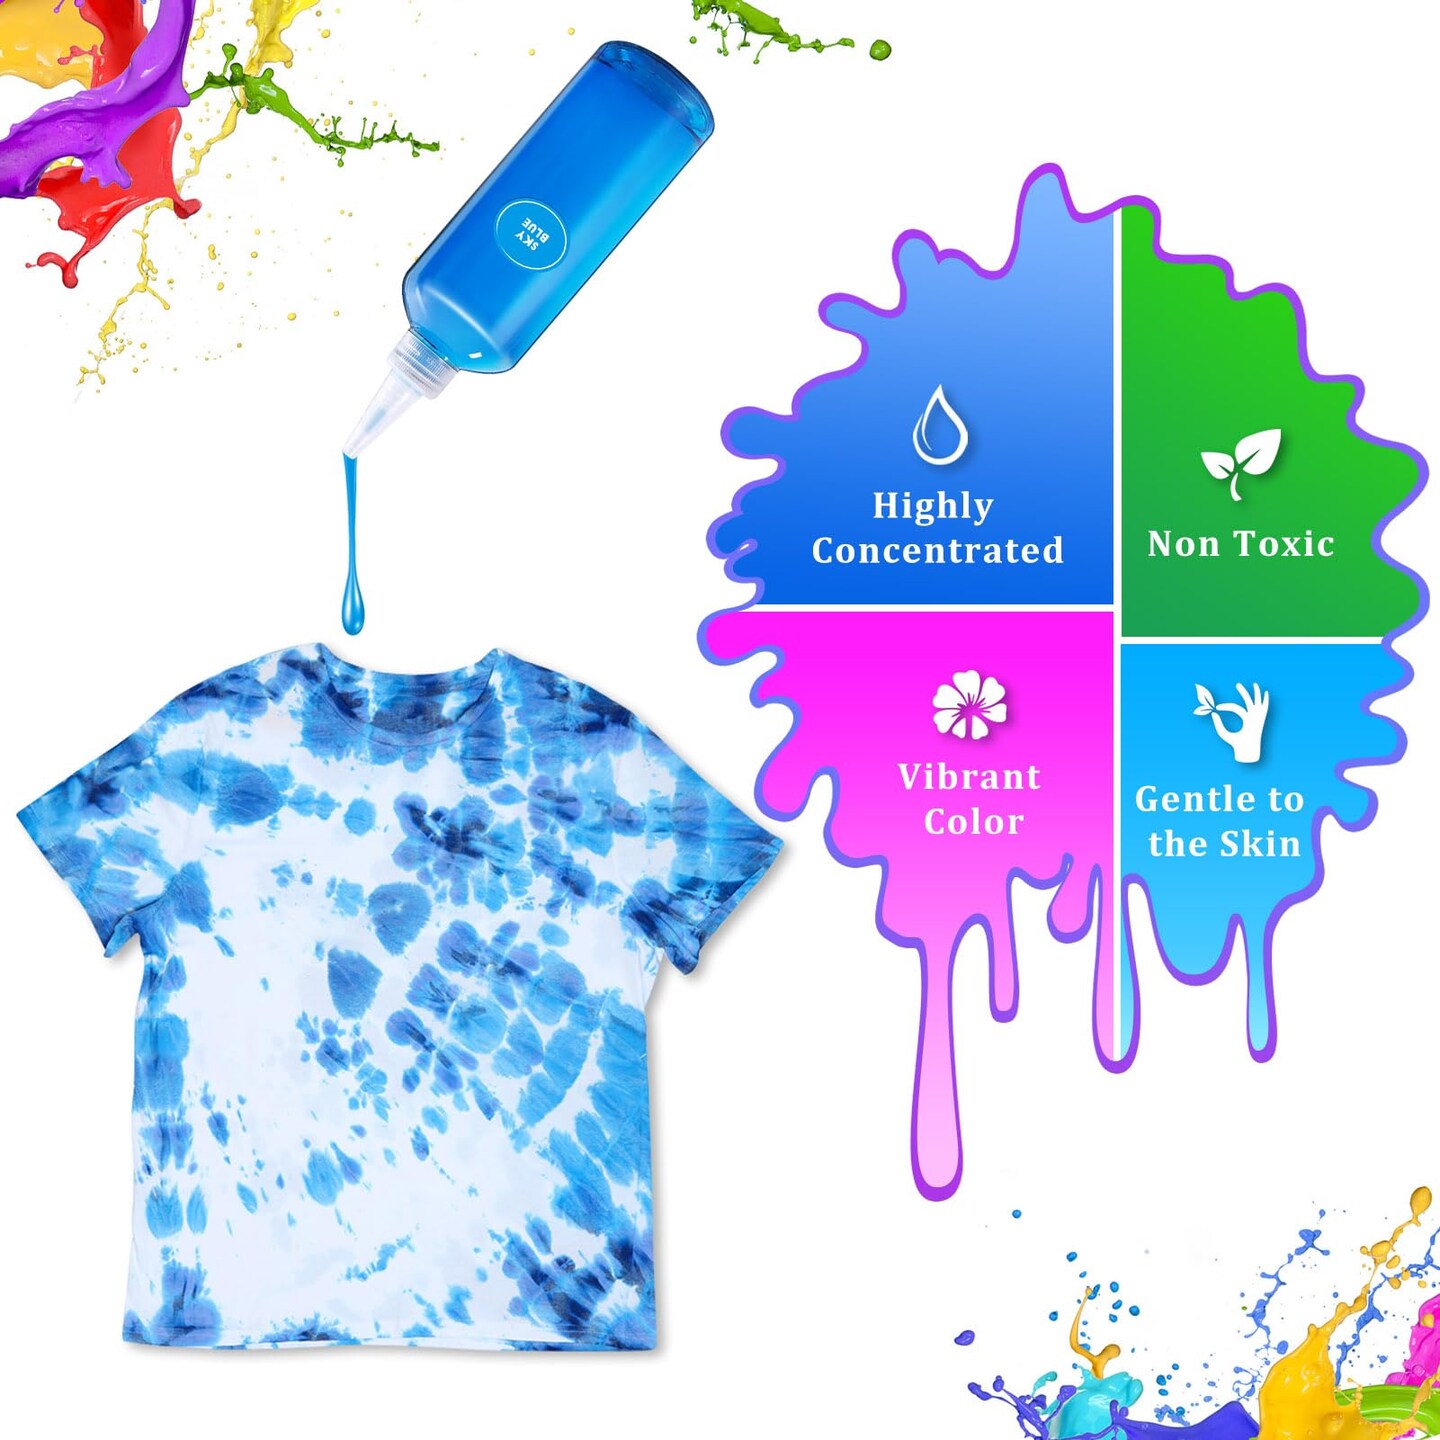 PATIFEED Tie Dye Kit 14 Colors Tie Dye Kit for Large Groups, Christmas Colors Tie Dye for Kids, Non Toxic Permanent Fabric Dye Summer Activities for Kids, Adults, Large Groups, Handmade Party